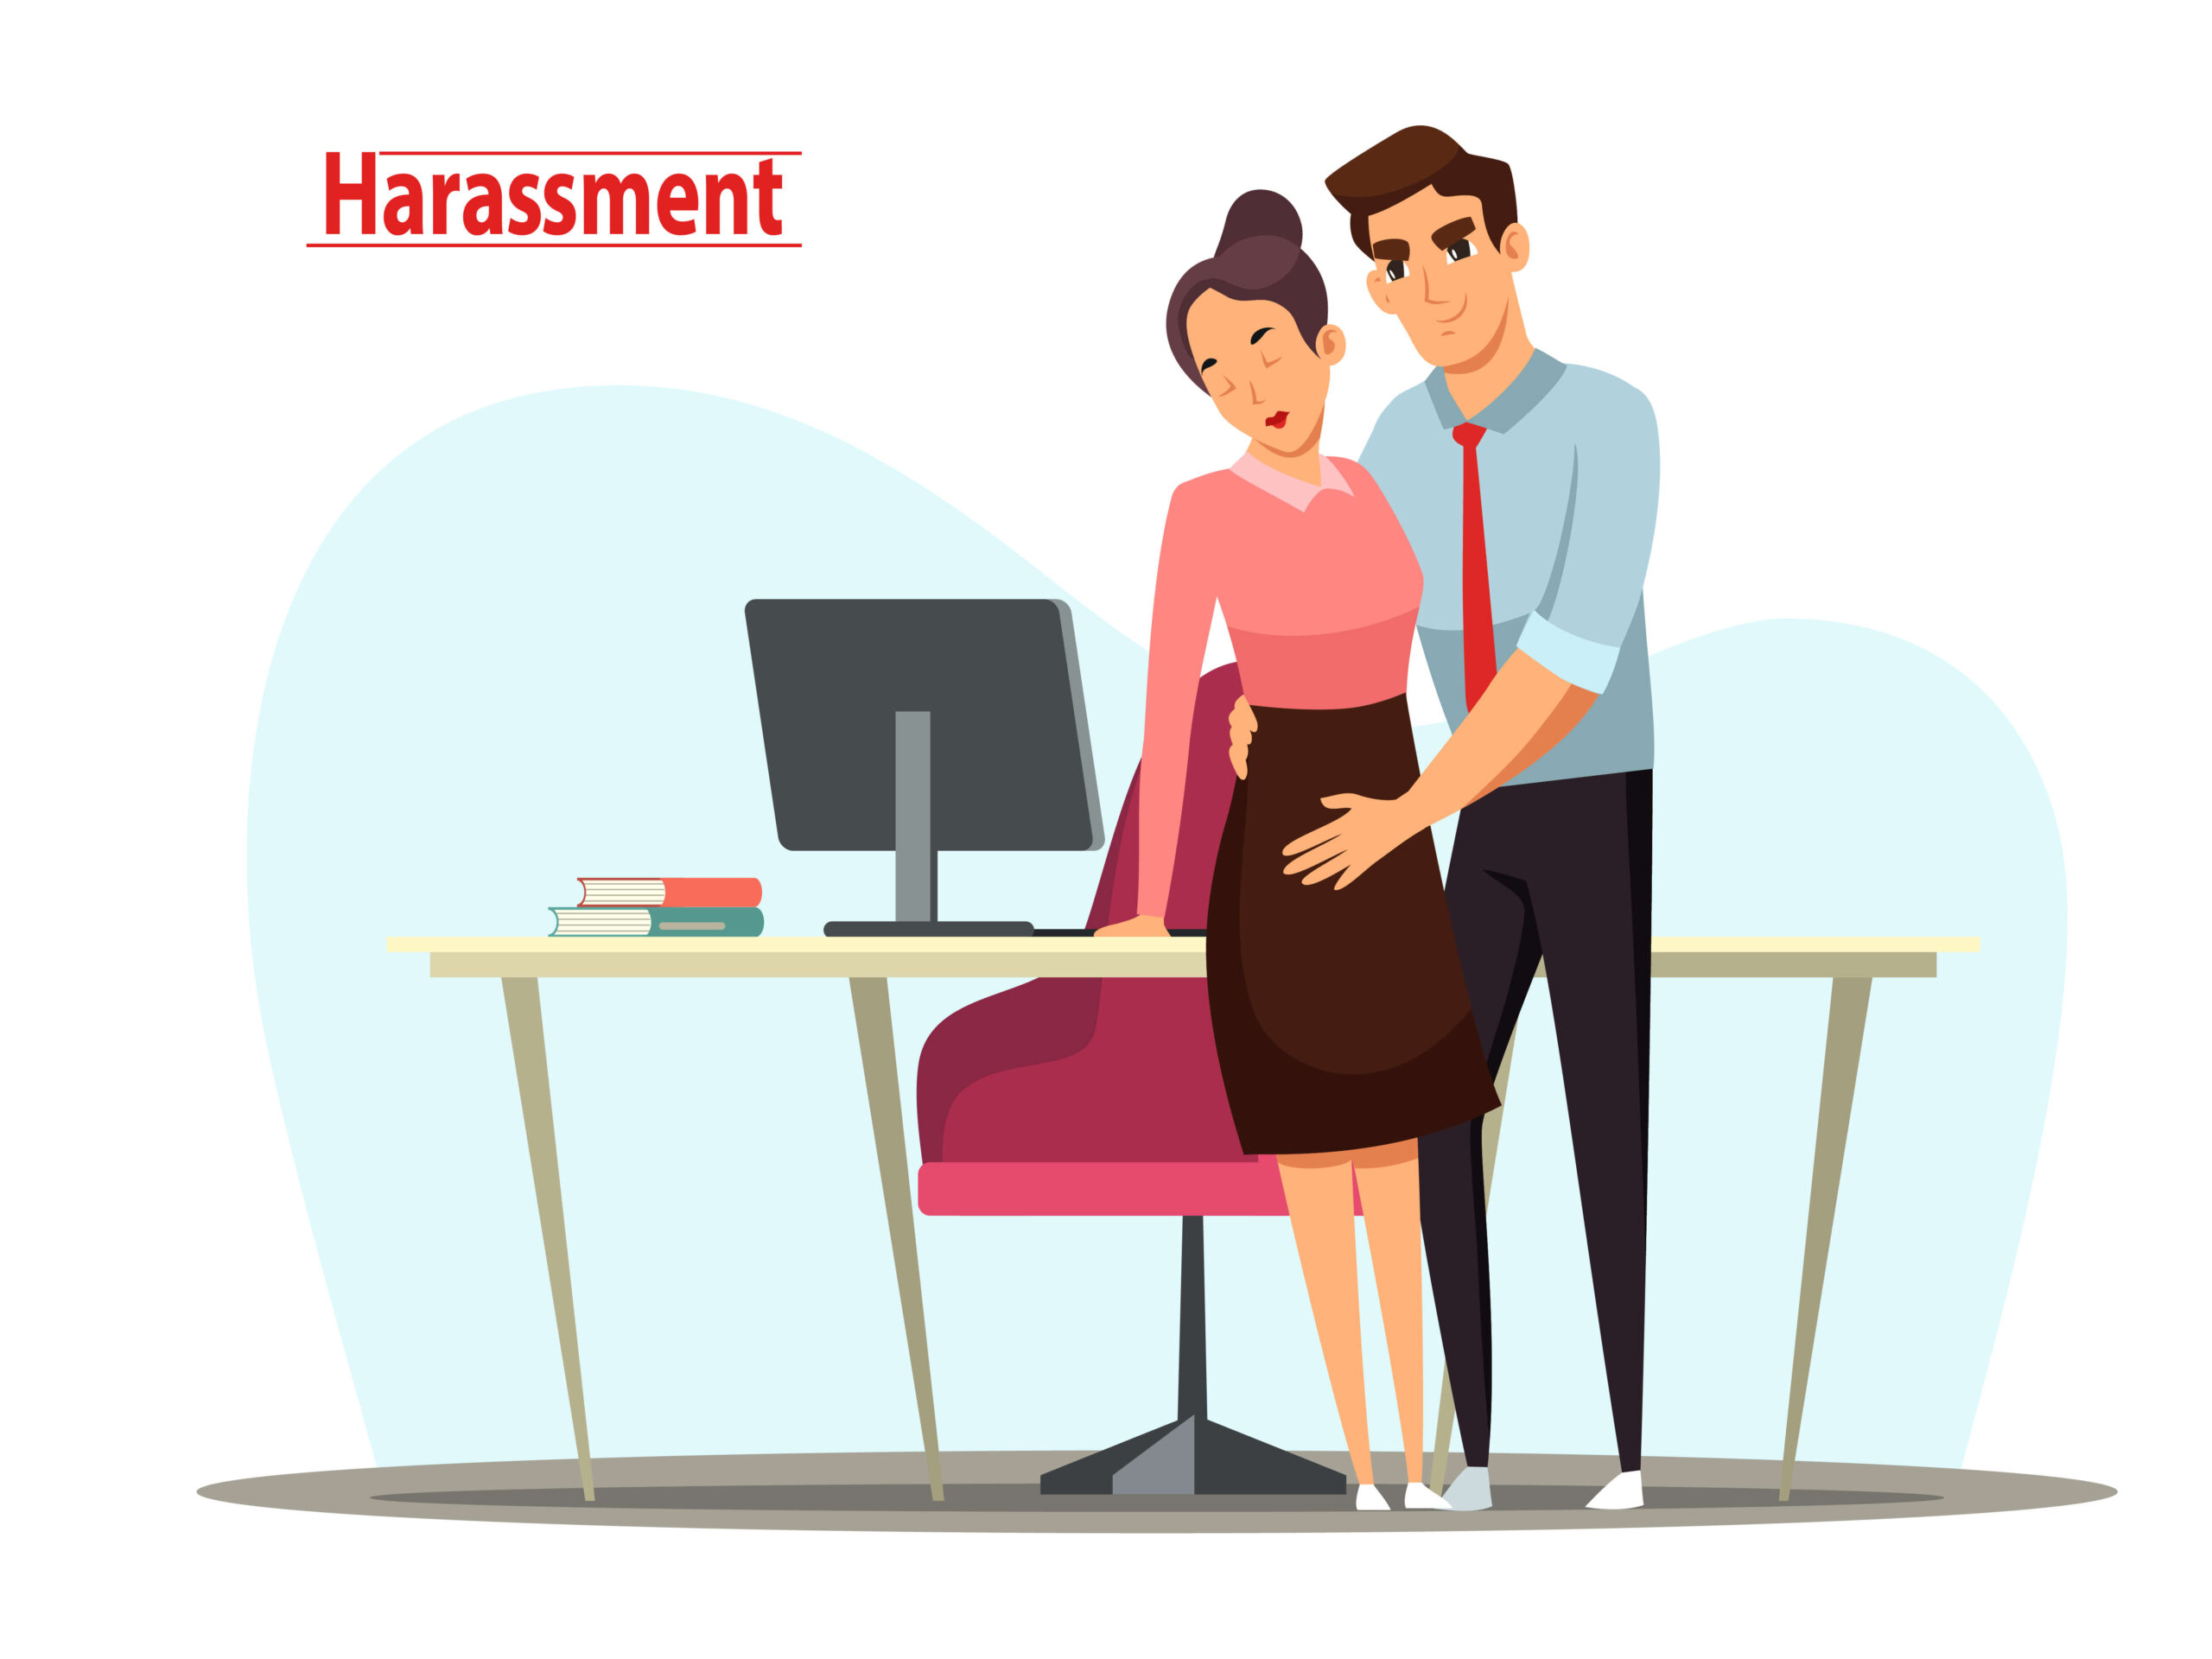 sexual abuse incident among business people male boss employee harassing sad woman unwanted bad experience office adult colleagues standing computer desk workplace